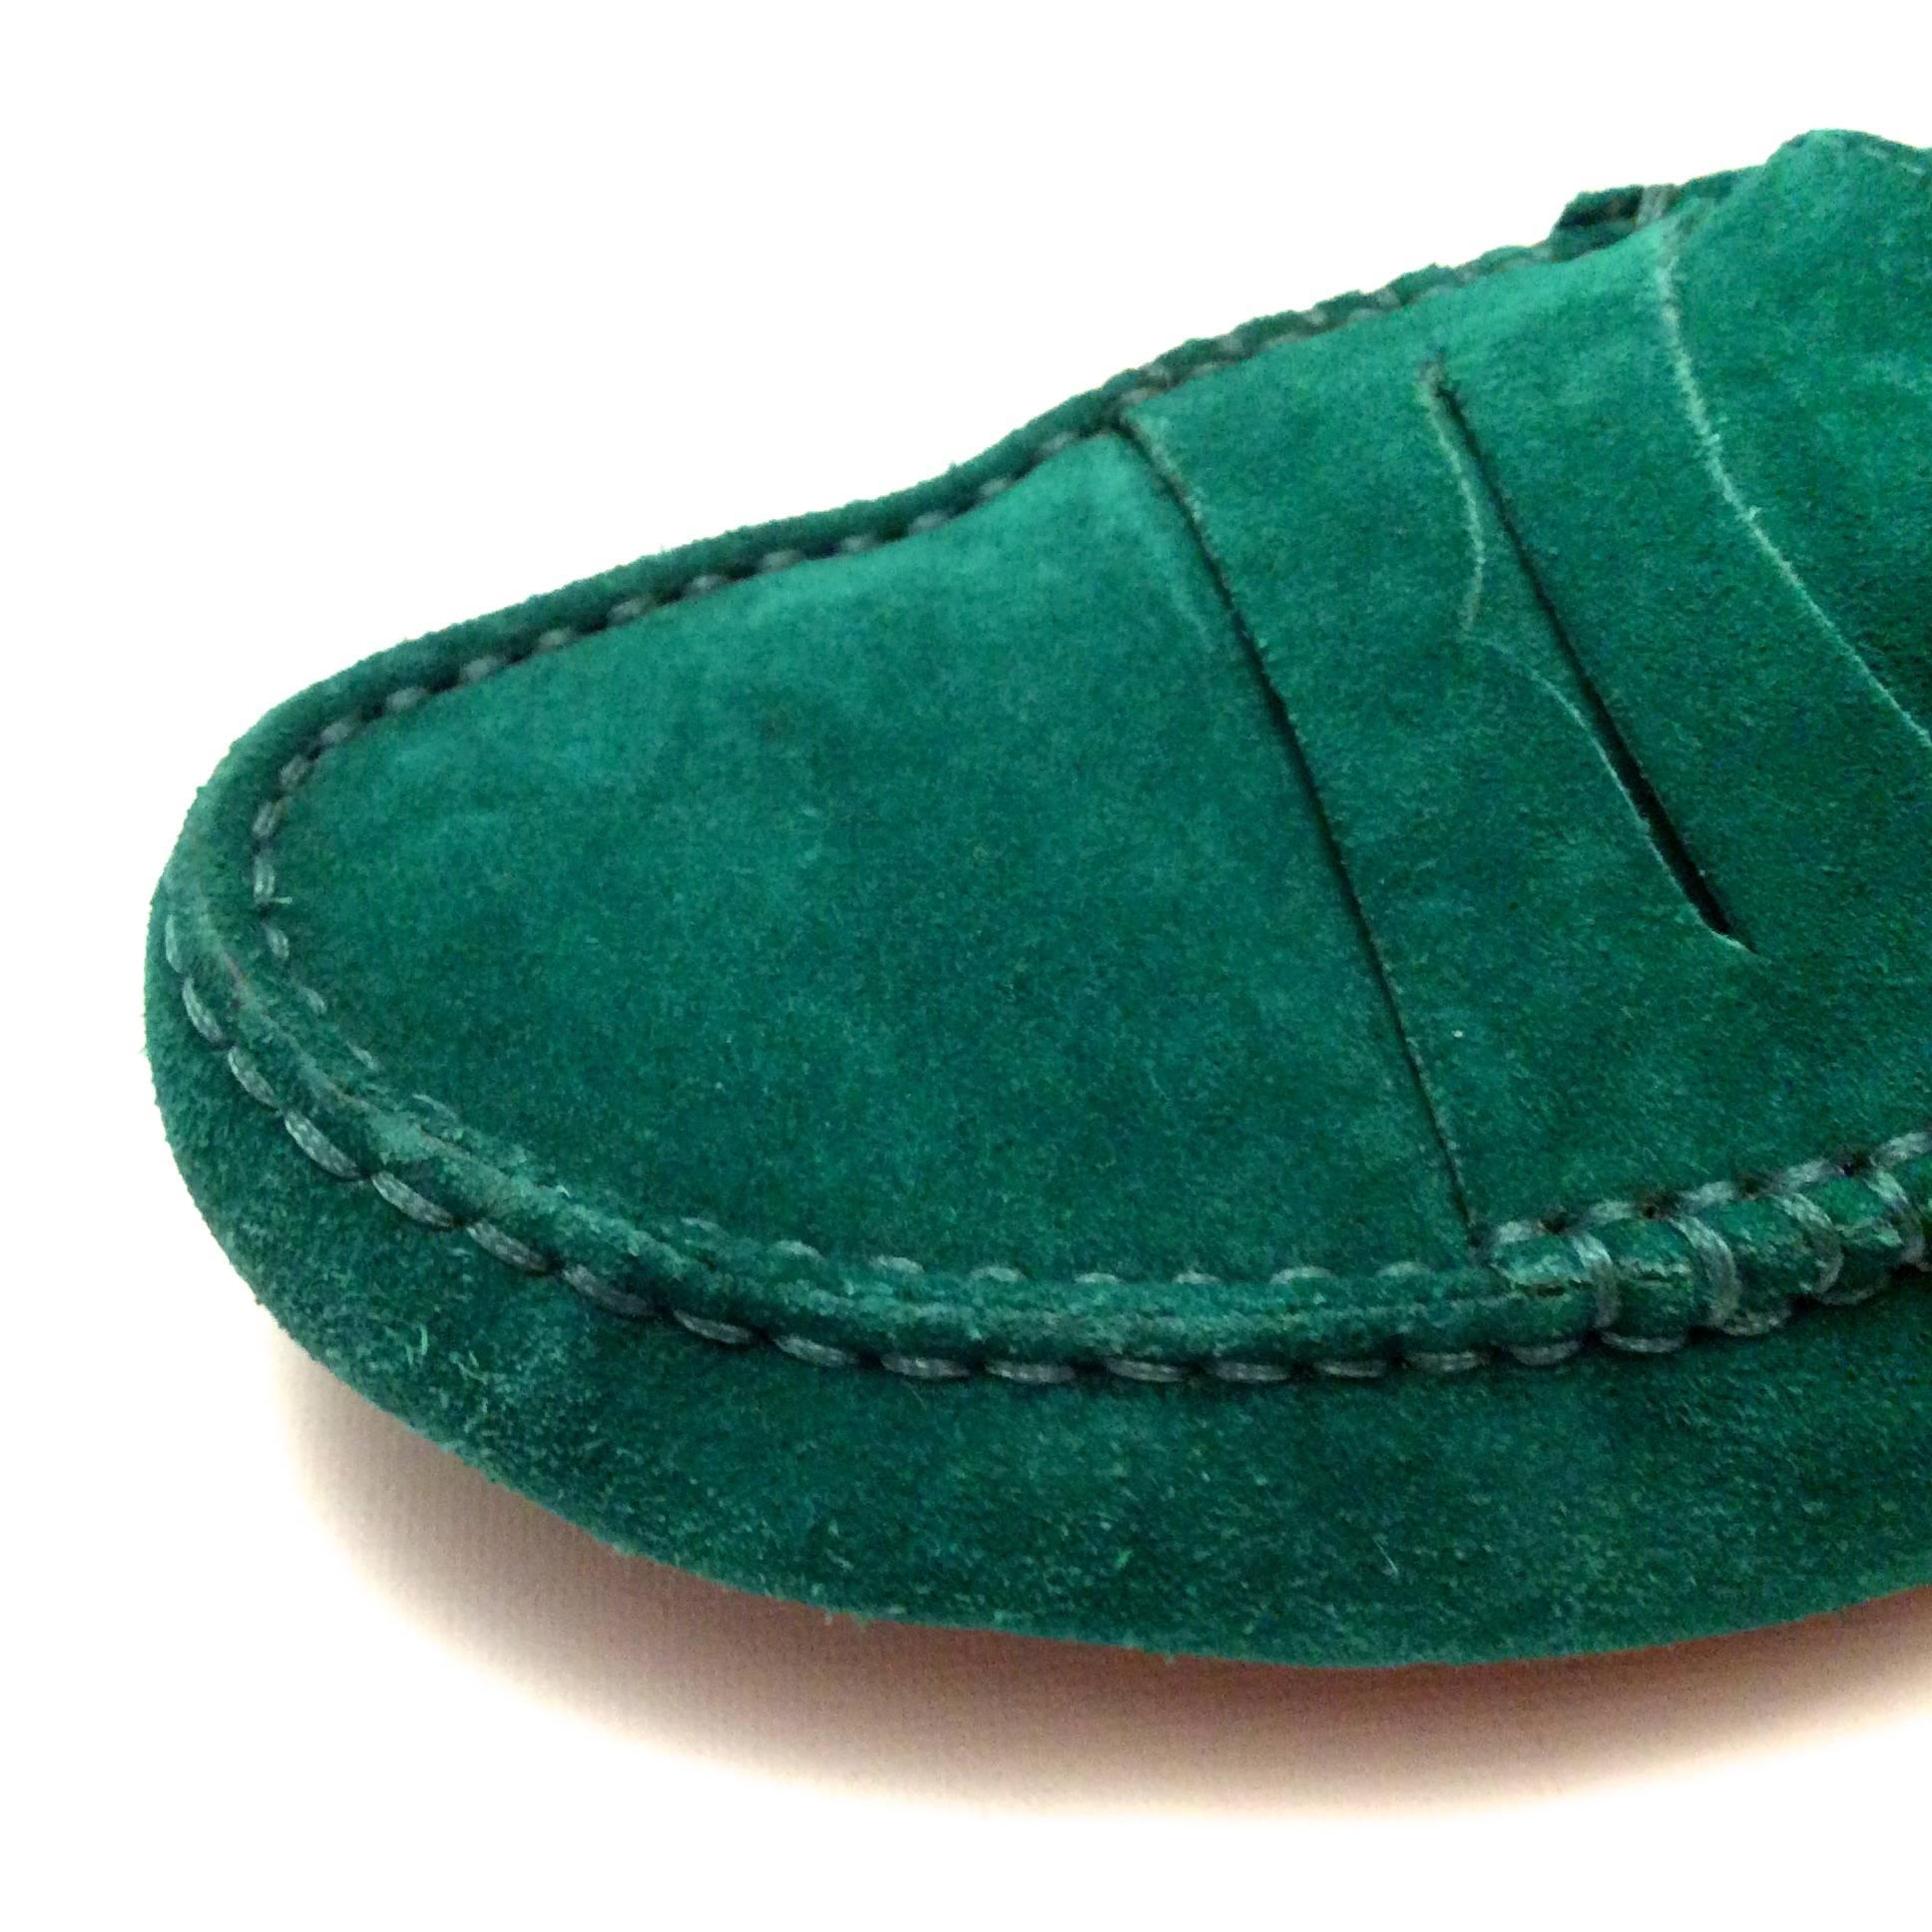 Tod's Driving Loafers Green Suede - Size 37 3